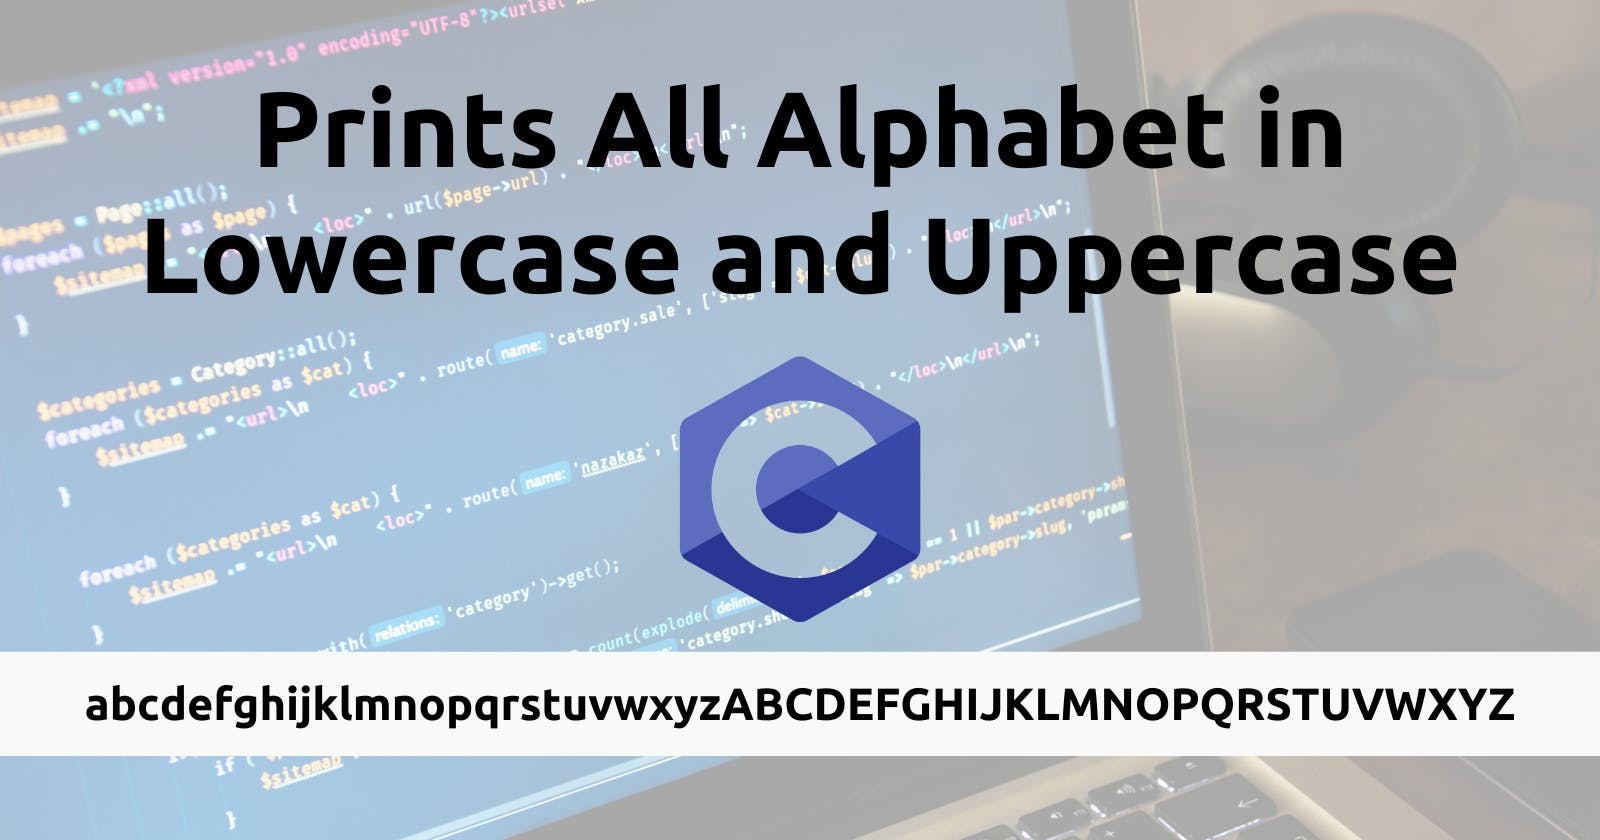 A Simple C Program That Prints The Alphabet in Lowercase And Uppercase